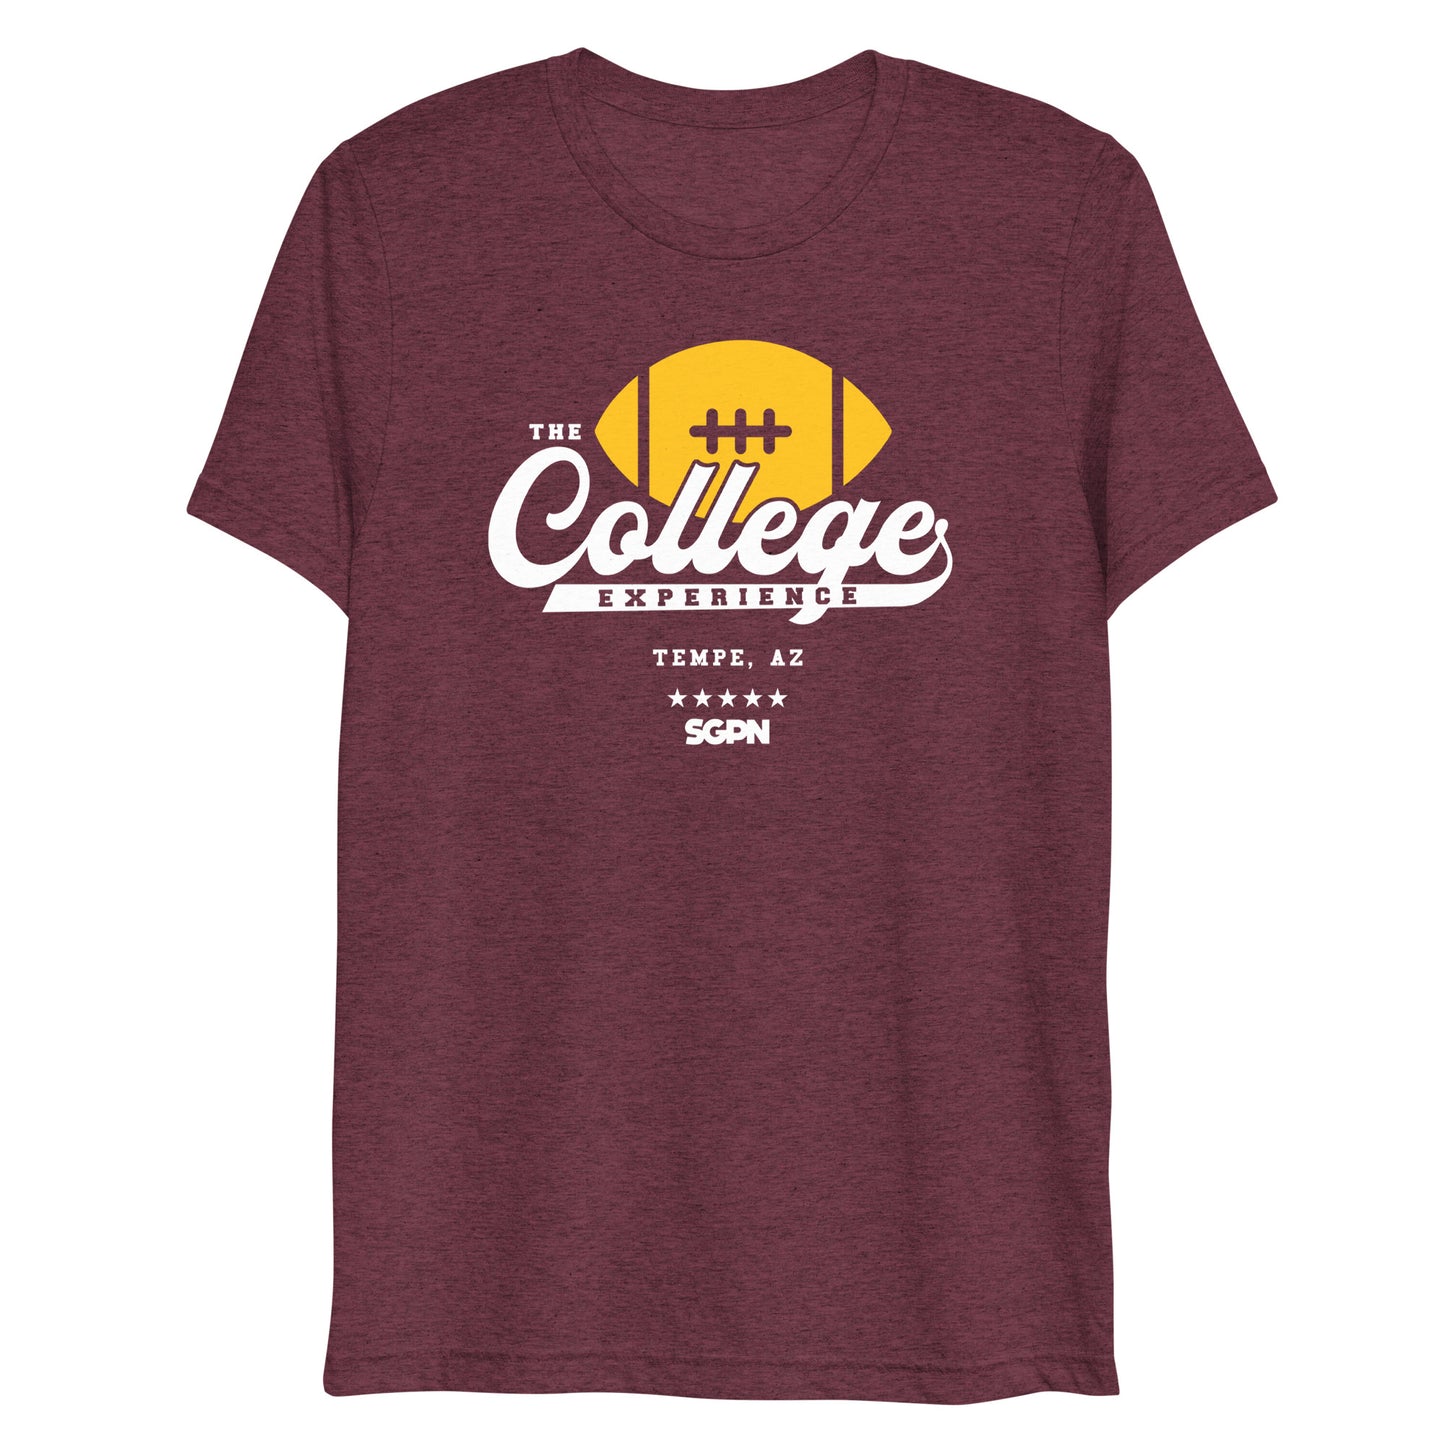 The College Football Experience - Tempe edition - Maroon Short sleeve t-shirt